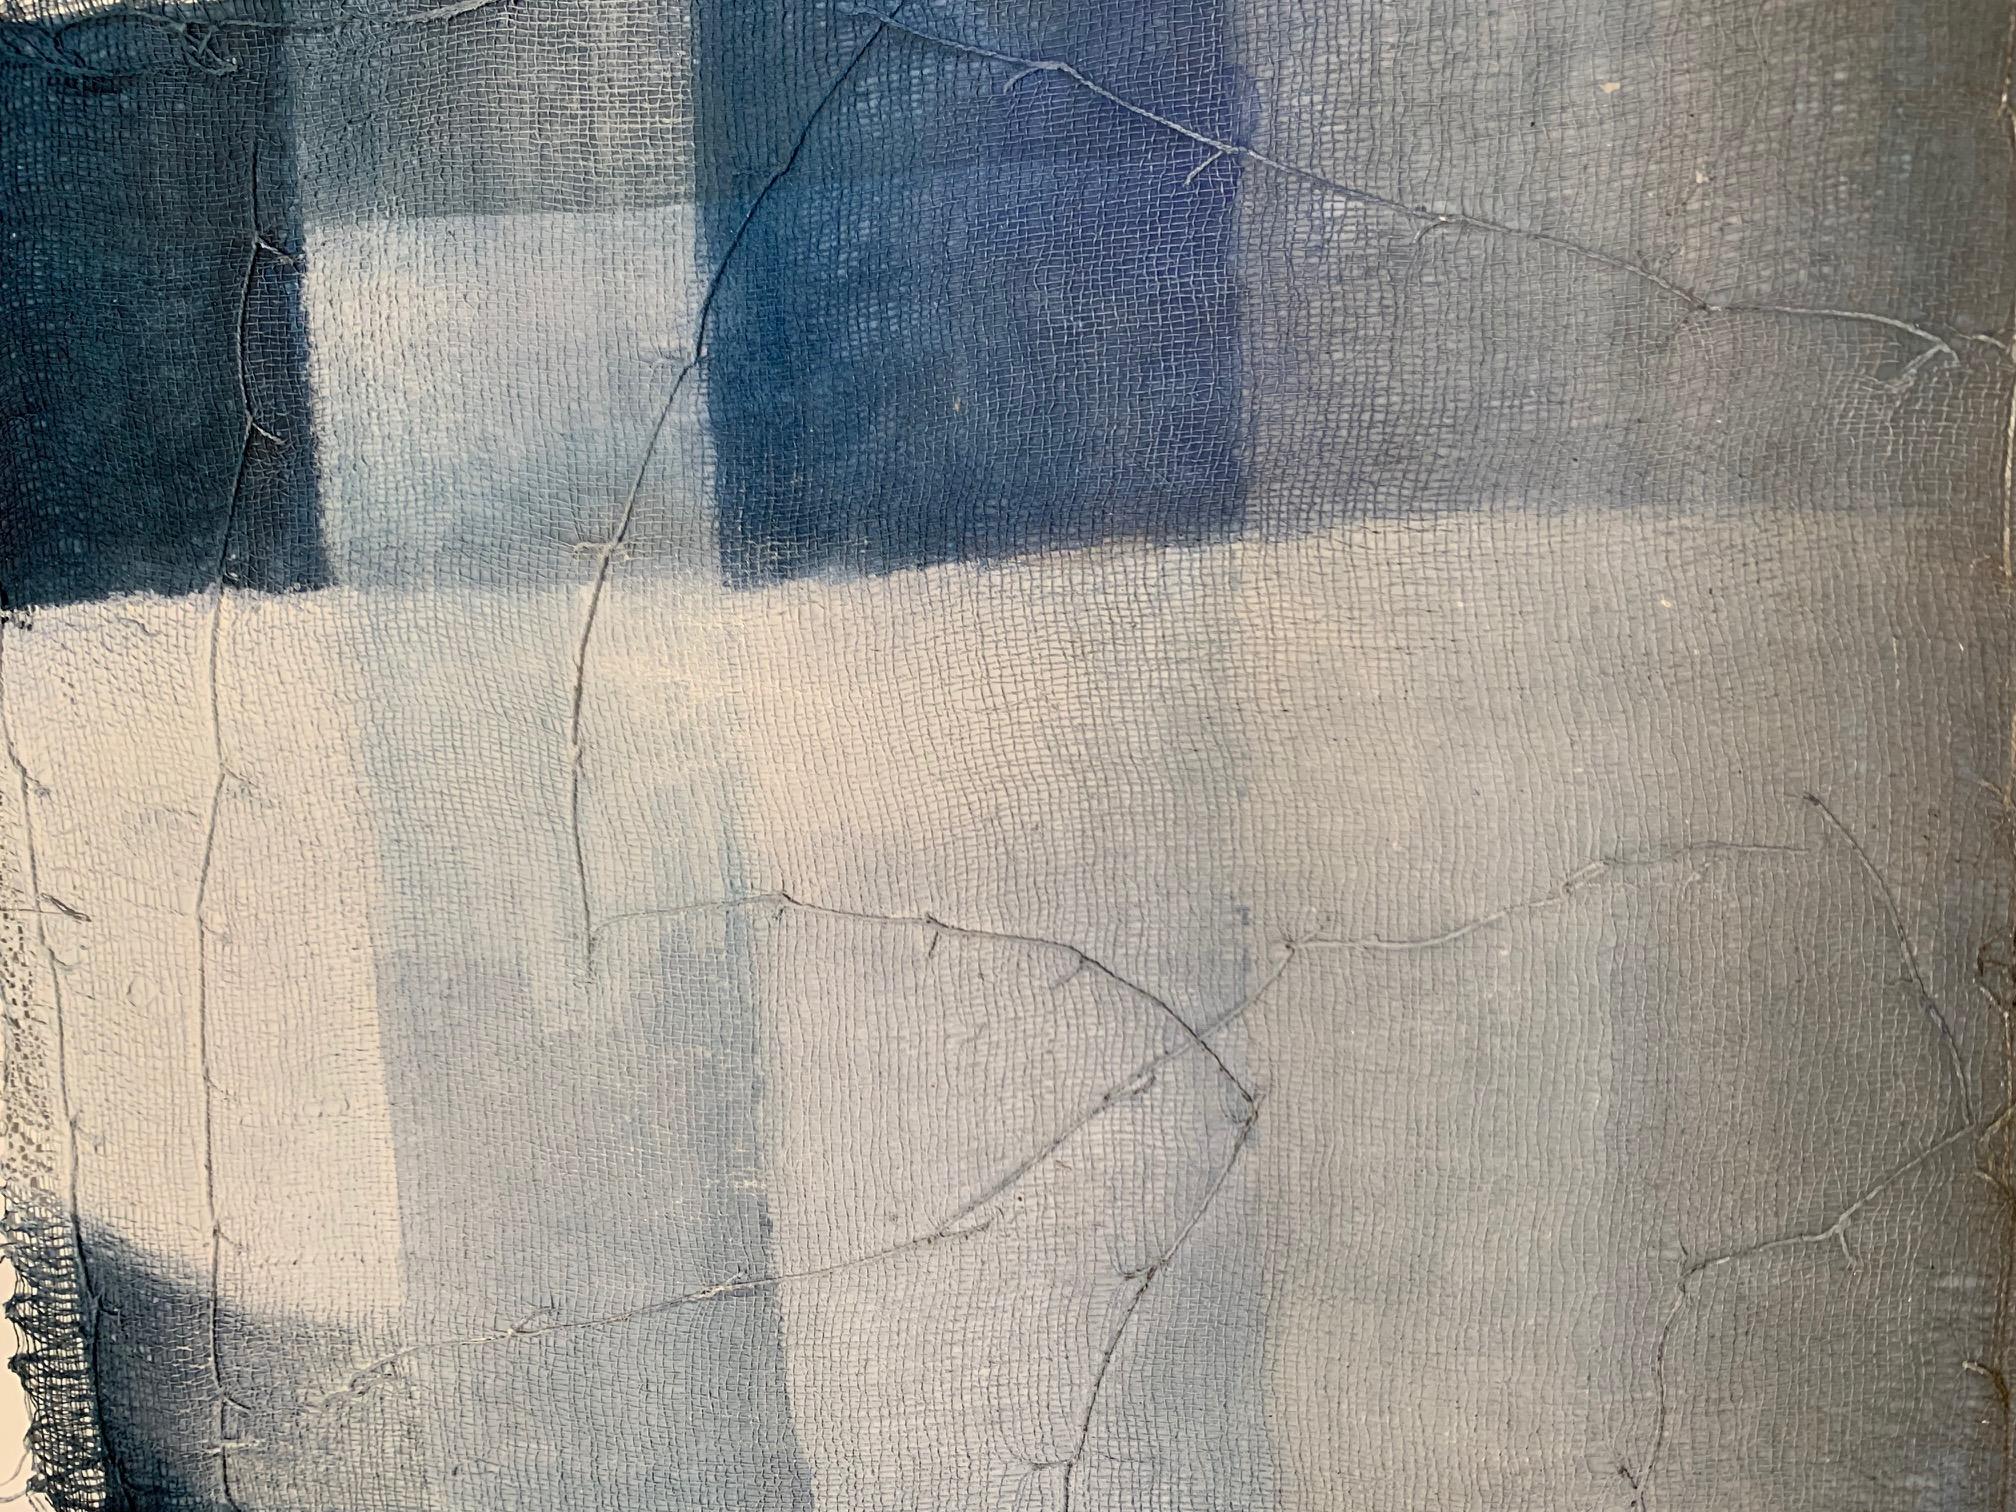 Other Shades of Blue Painting by Artist Diane Petry, Contemporary, Belgium